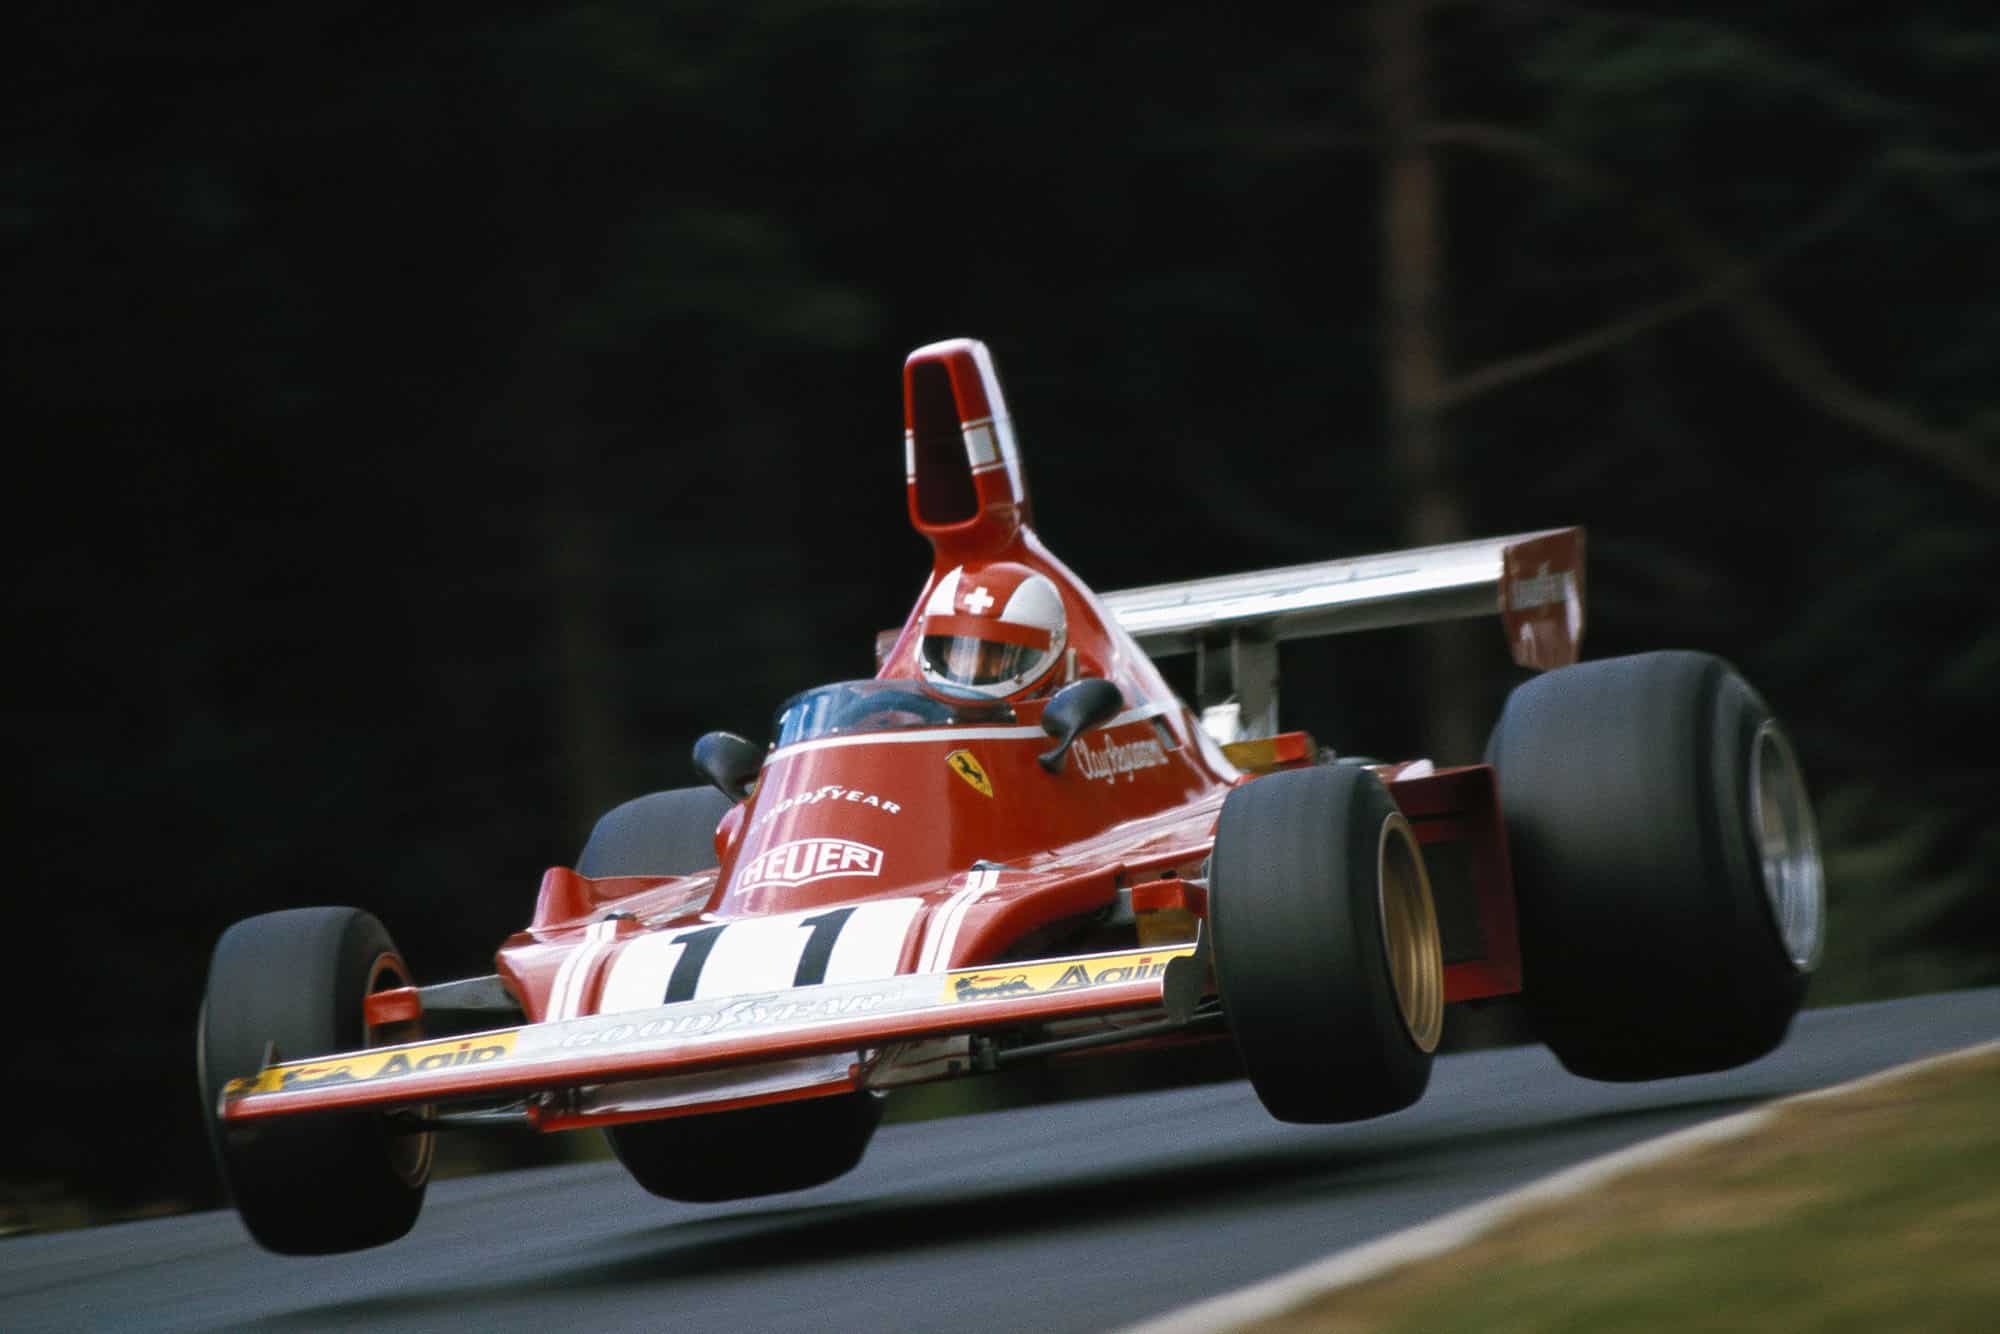 Chassis BT48/2 - Photo Gallery (only F1 entries) - Racing Sports Cars